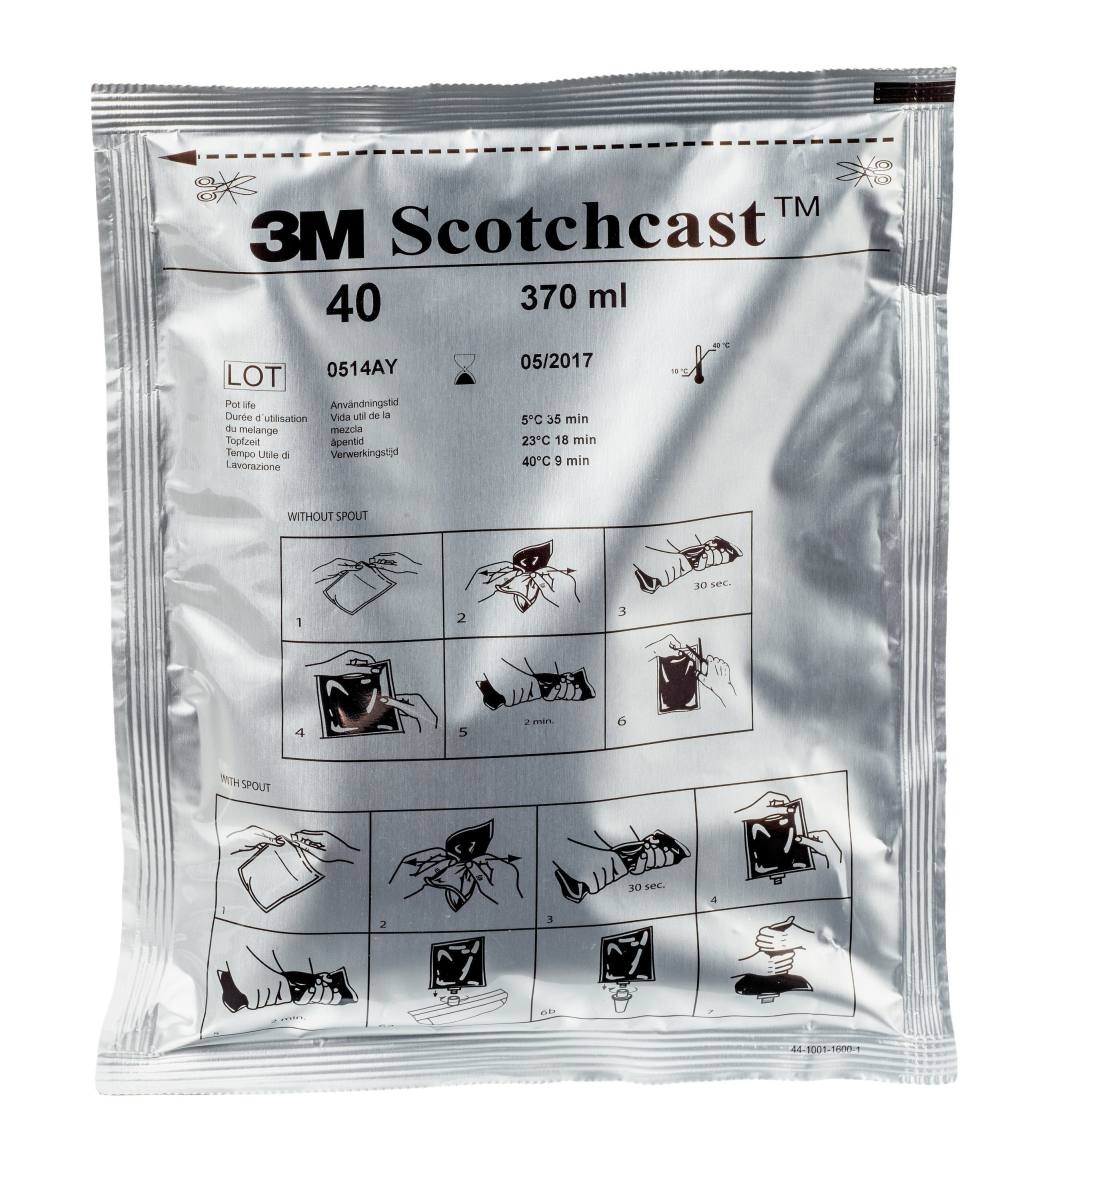 3M Scotchcast 40-C-B, polyurethane cable resin, 2-component GMG system, size C, 370 ml, bulk pack